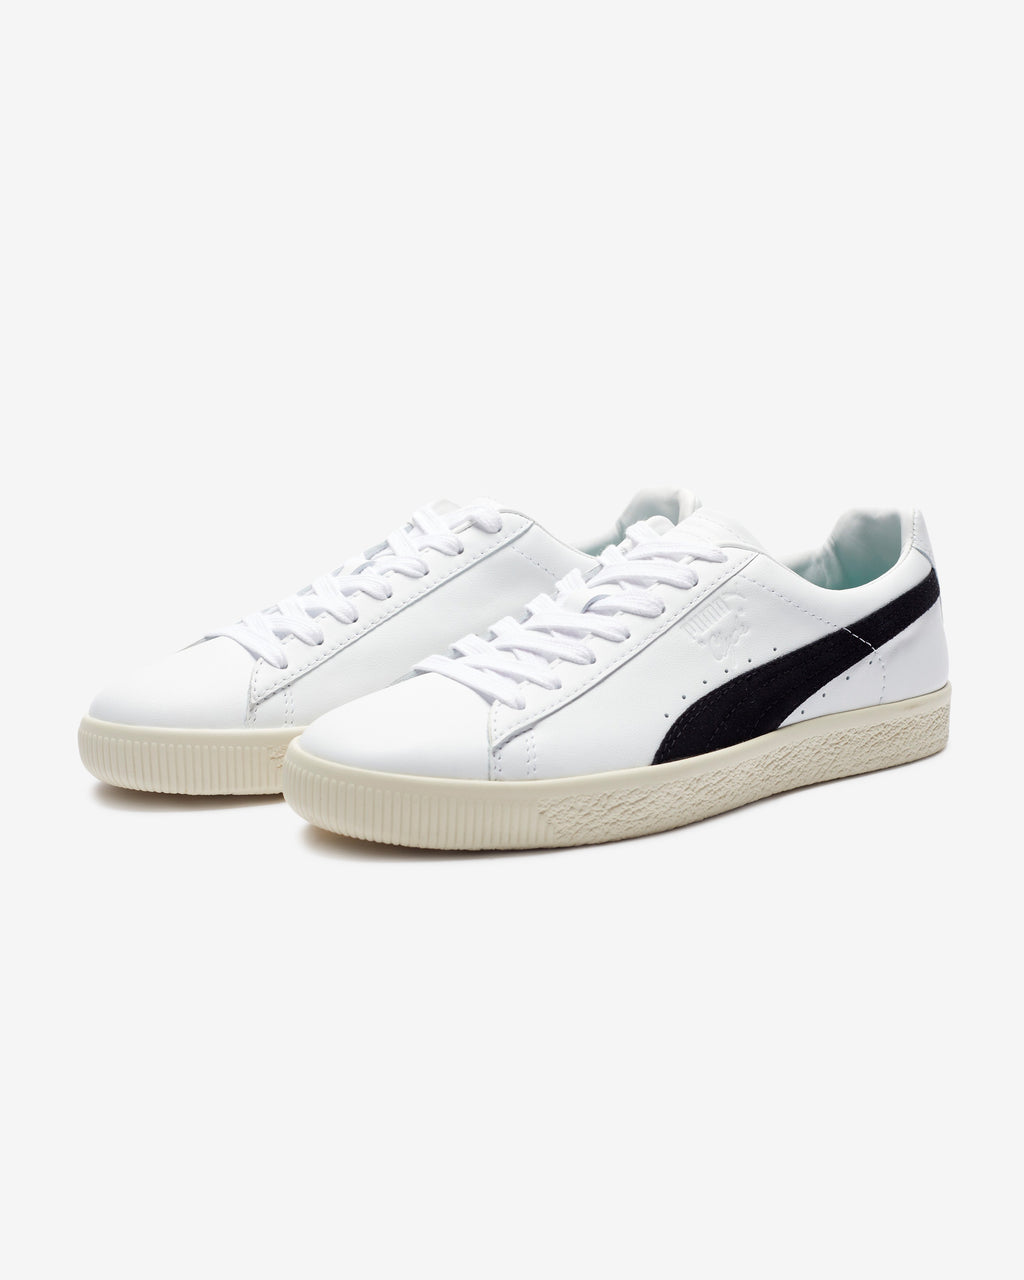 PUMA CLYDE 'MADE IN GERMANY' - WHITE